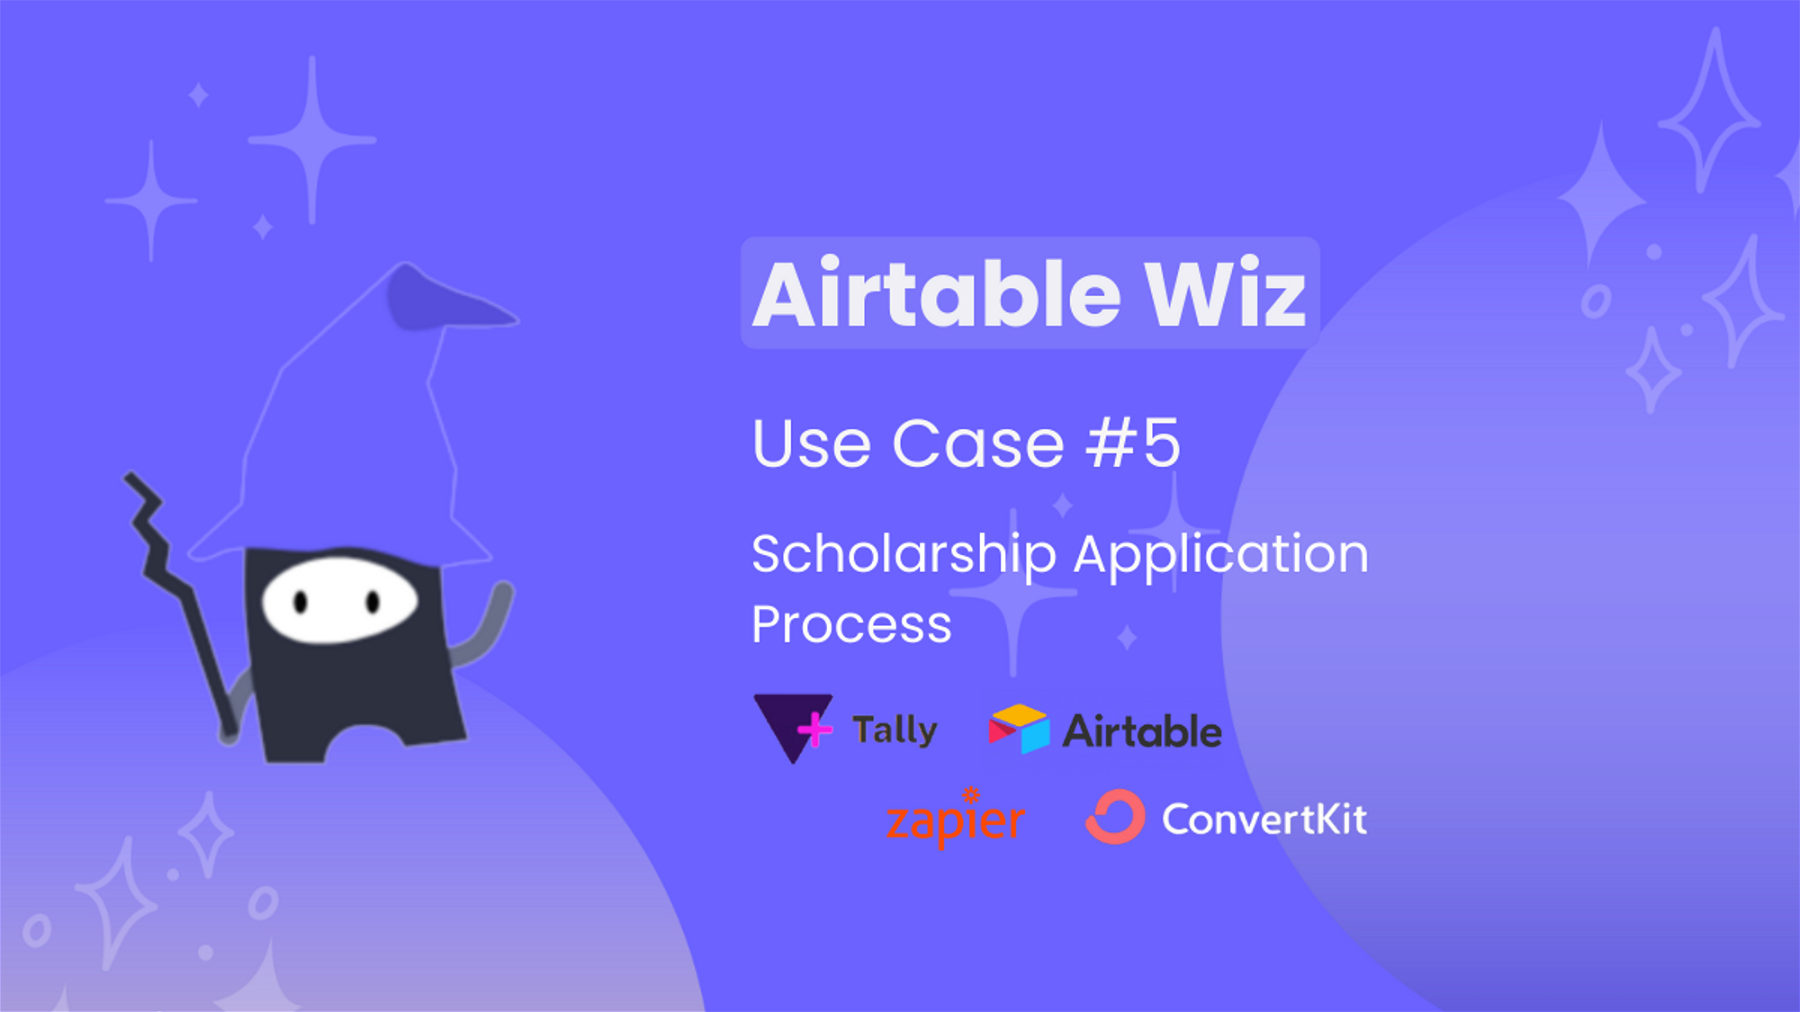 Use Case #5: Automating Scholarship Application Process